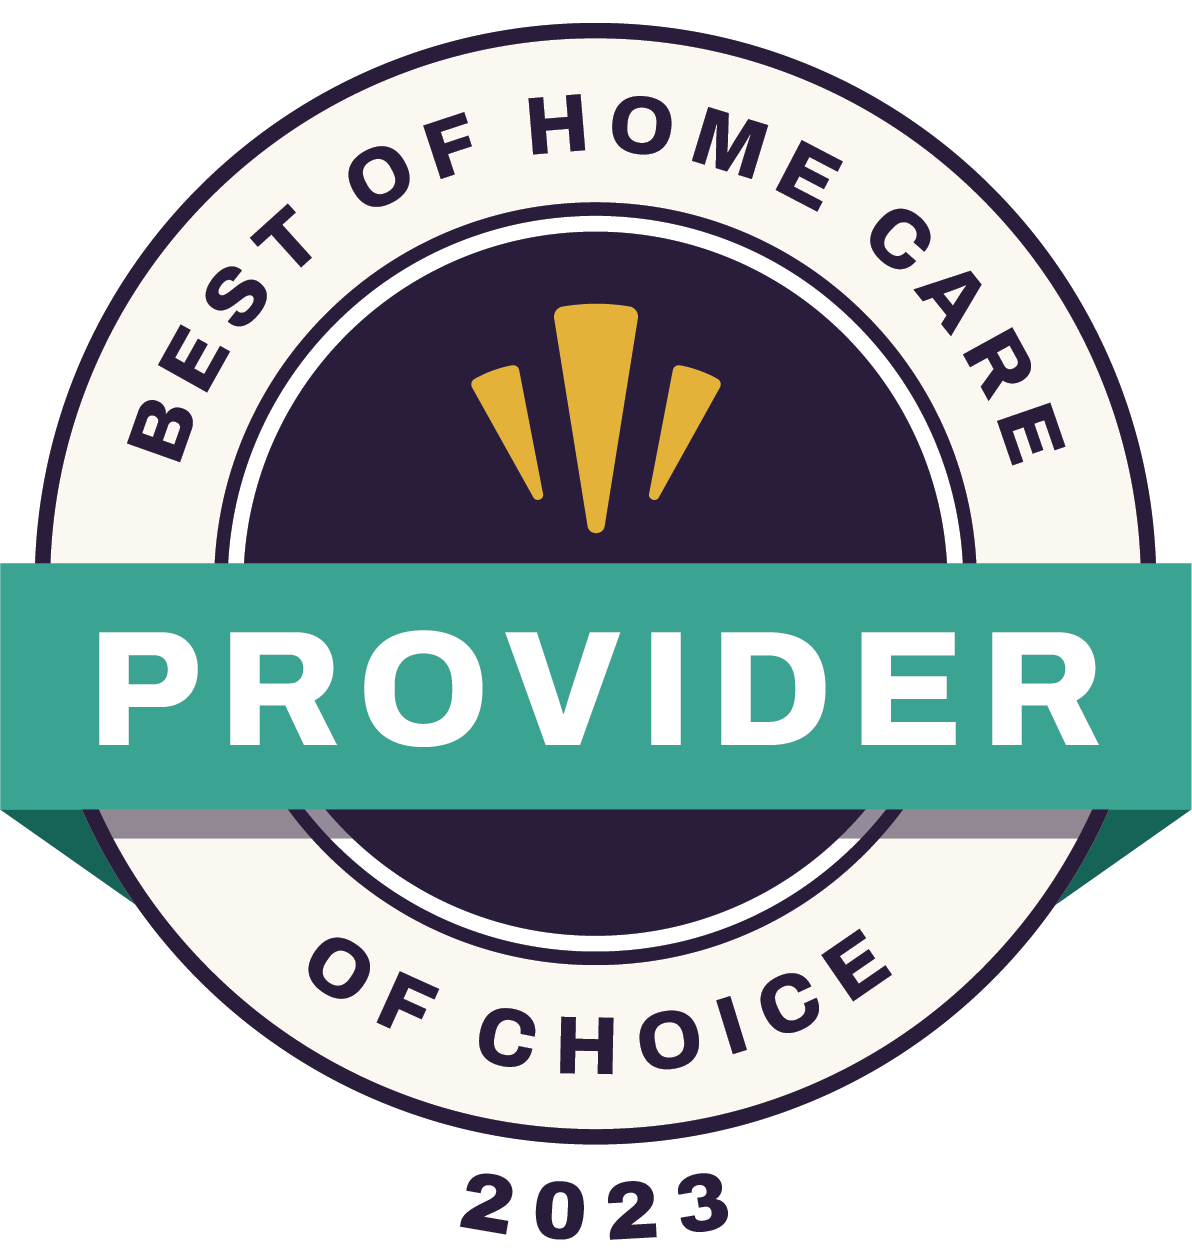 Inspired Care Solutions in Boerne, Texas is 2023 Home Care Employer of Choice